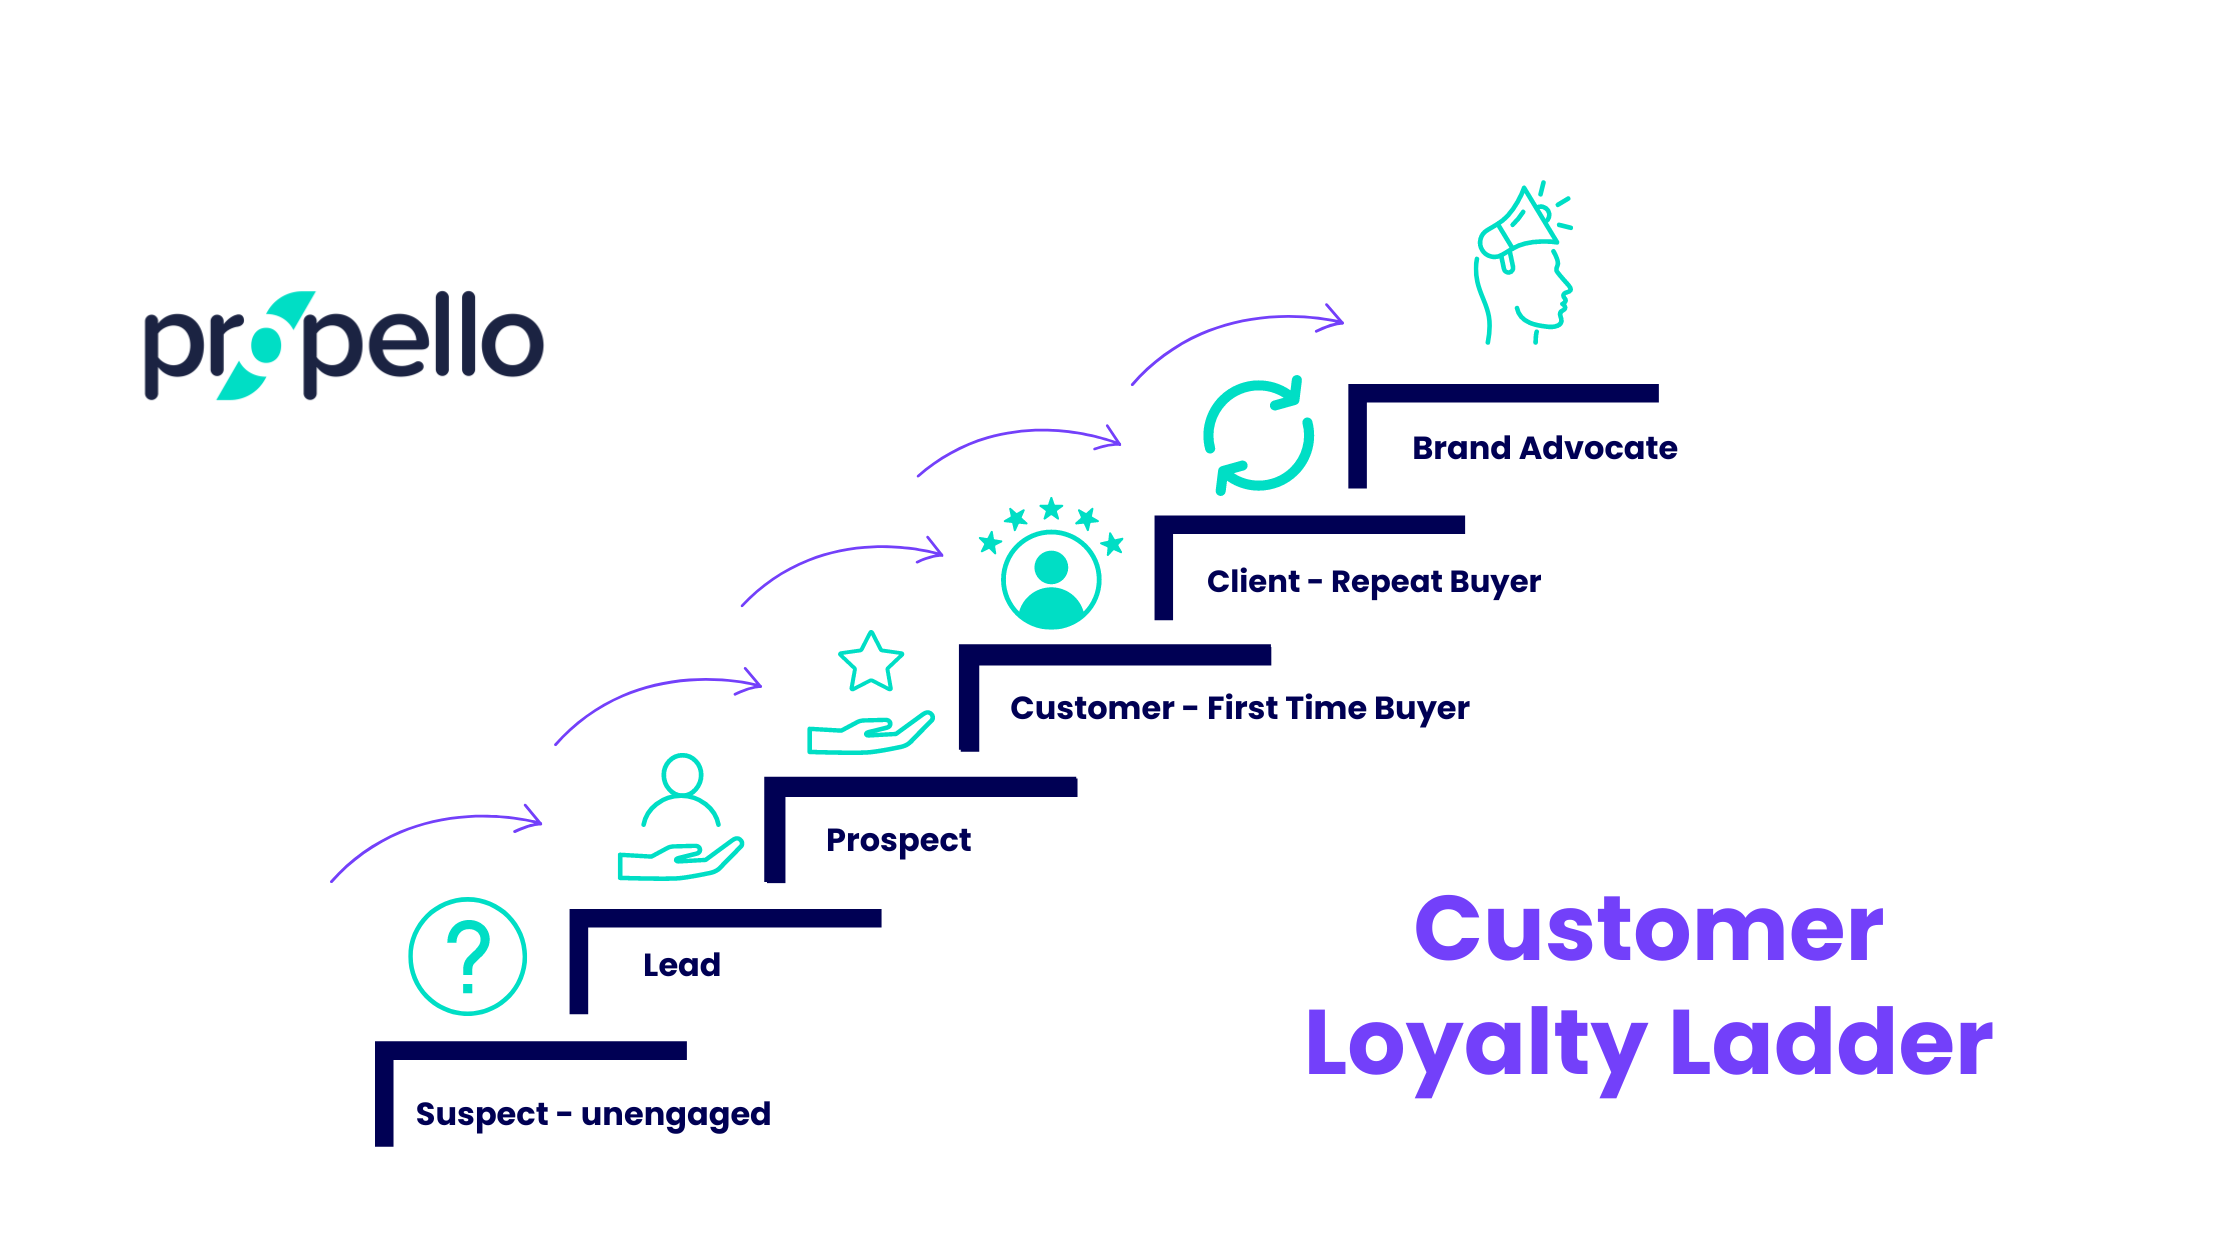 Customer Loyalty Ladder - Stages